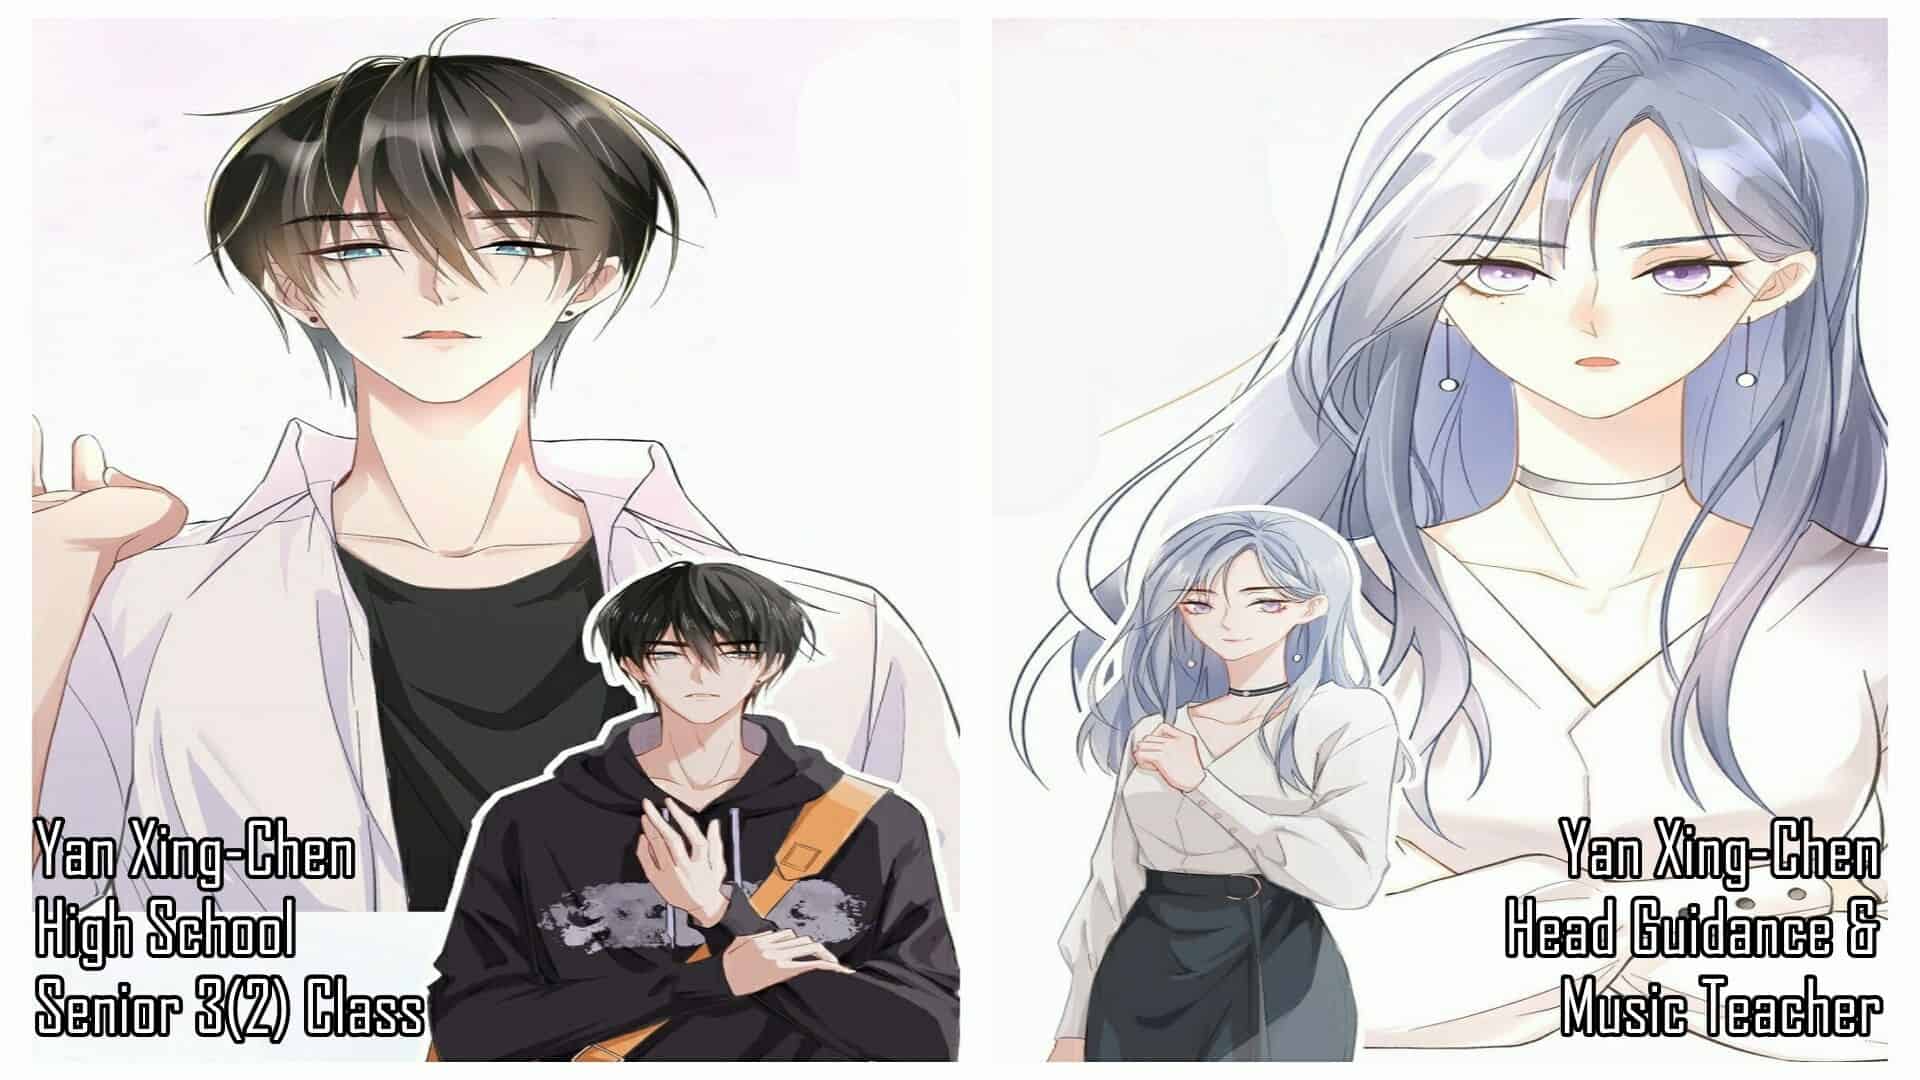 Yan Xing-Chen Senior 3(2) Class (Left) And Yan Xing-Chen Head Guidance & Music Teacher (Right) - The Distance Between The Stars Chapter 1